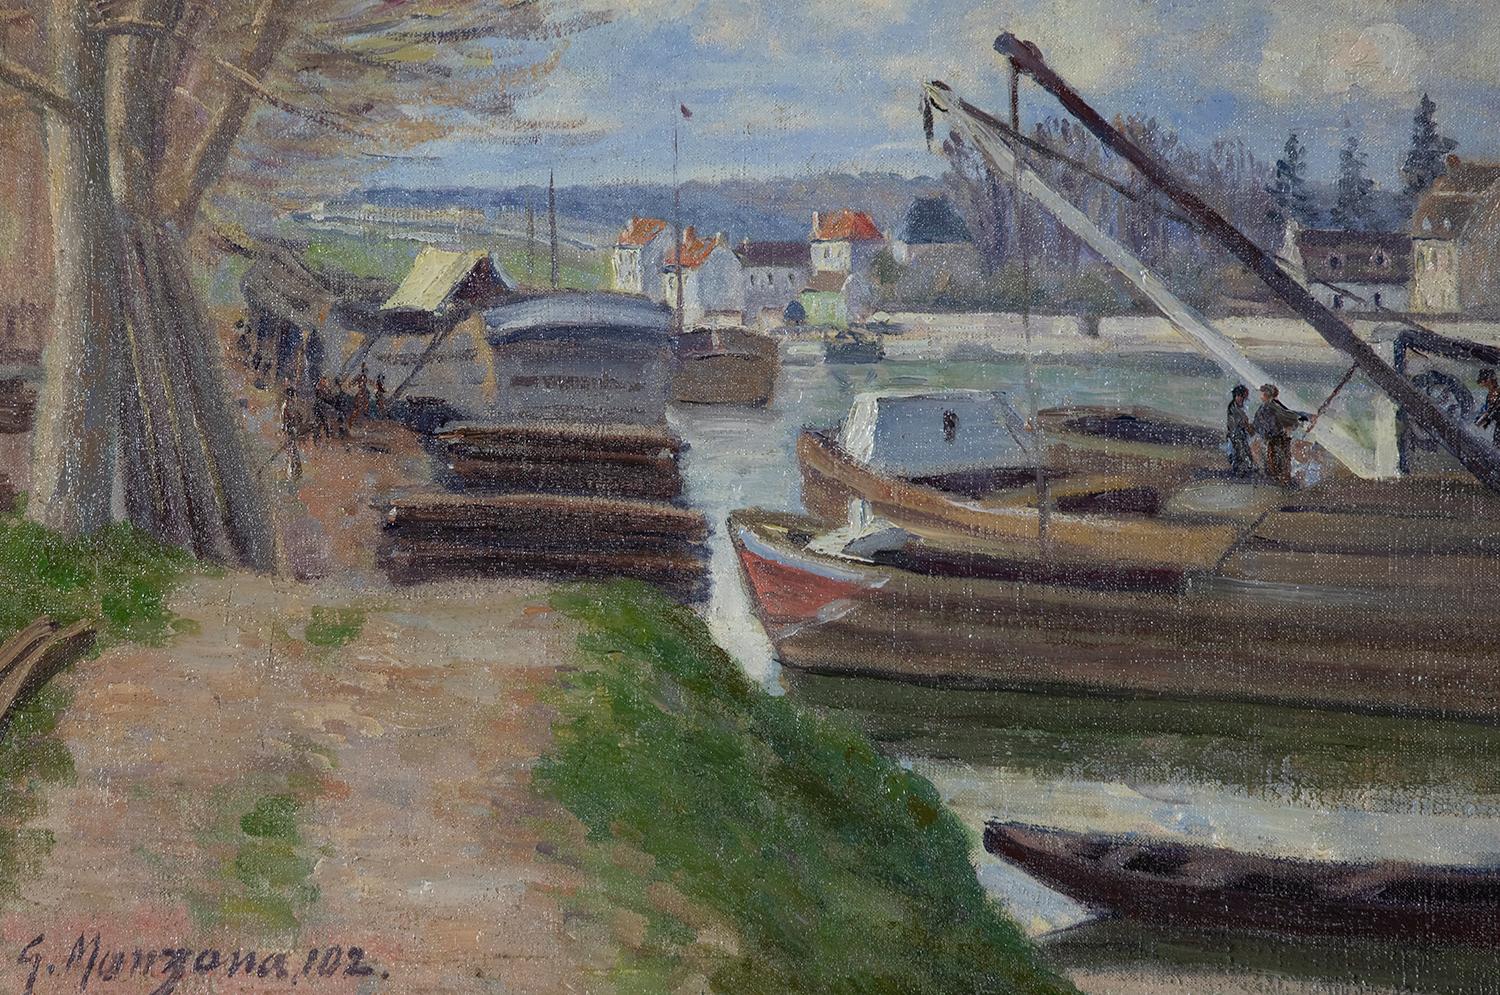 Péniches sur le Loing by Georges Manzana Pissarro (1871-1961)
Oil on canvas
54 x 65 cm (21 ¼ x 25 ½ inches)
Signed and dated lower left, G. Manzana 1902

This work is accompanied by a certificate of authenticity from Lélia Pissarro.

Provenance: